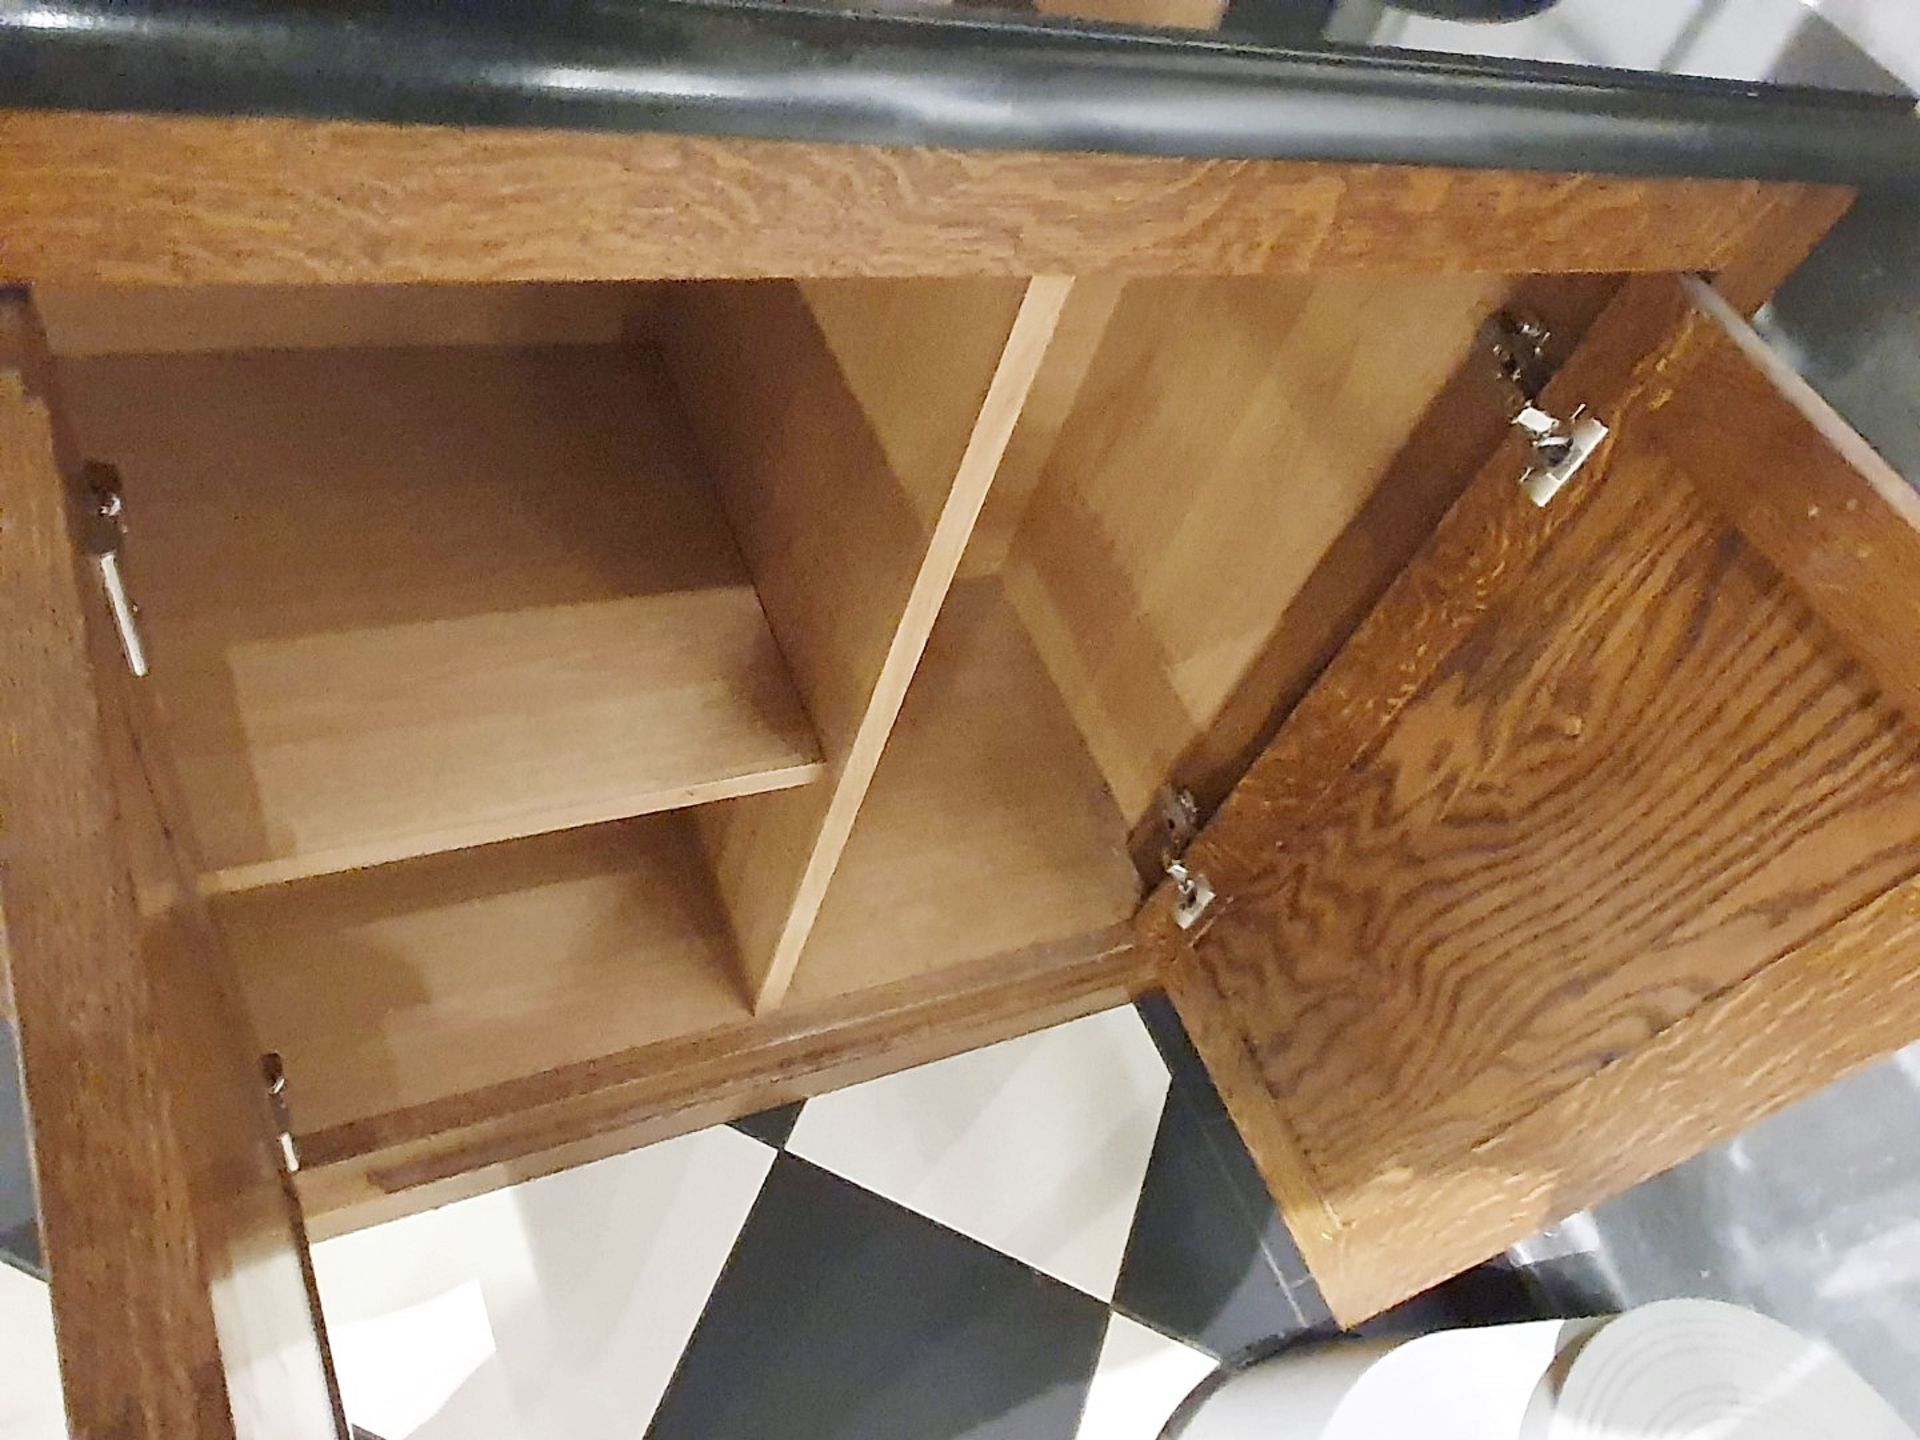 1 x Waitress / Waiter Service Cabinet in Walnut With Granite Surface and Cup Disposal Chute - H90 - Image 4 of 8